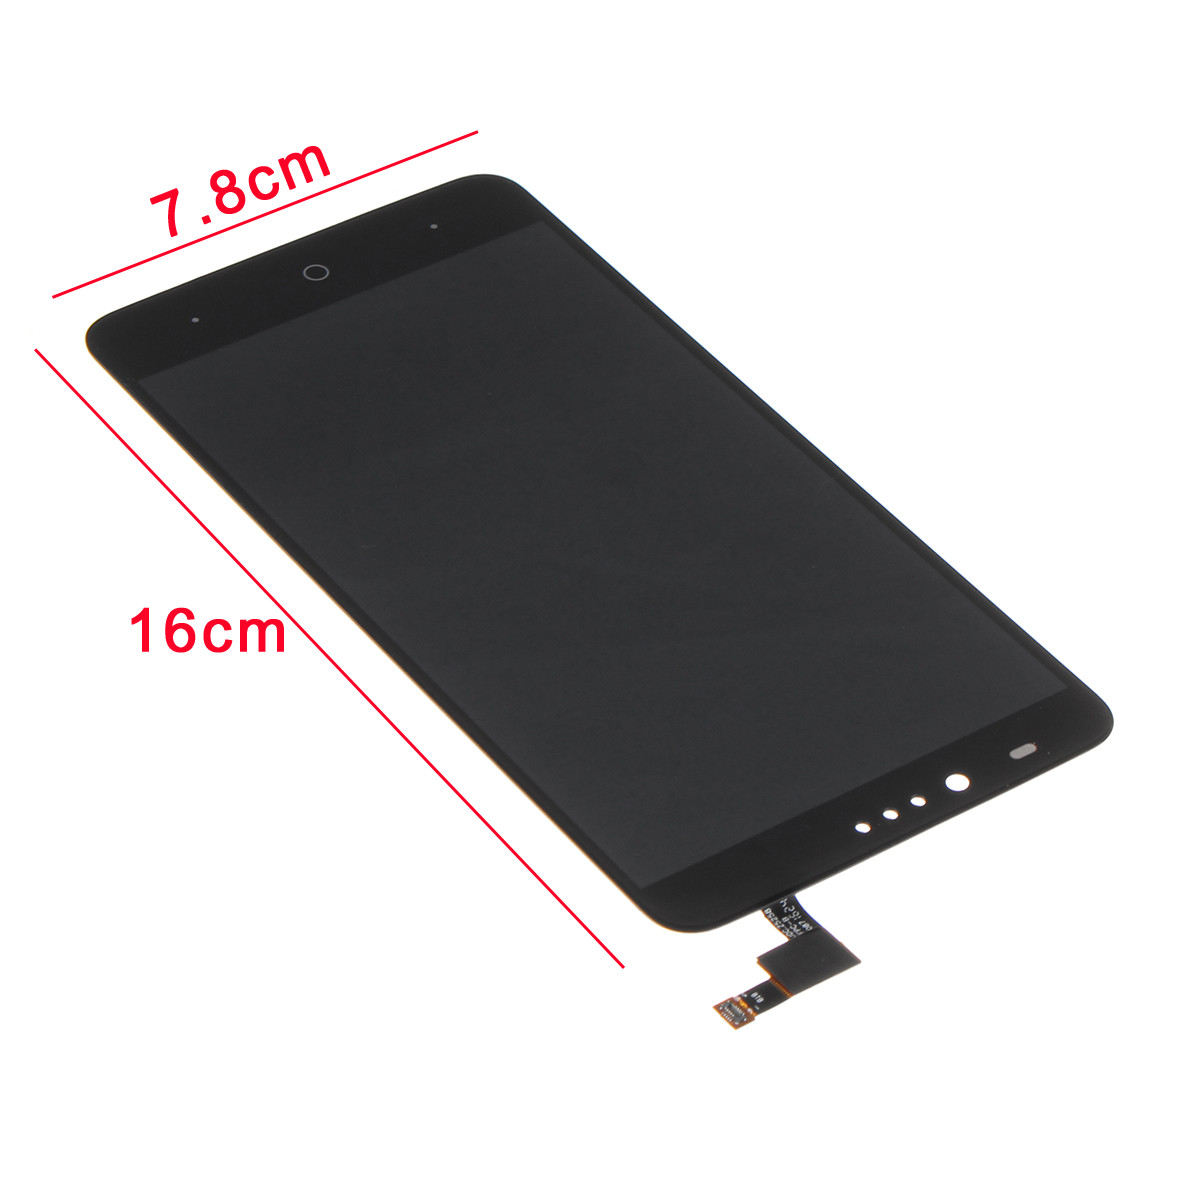 LCD-DisplayTouch-Screen-Digitizer-Assembly-Replacement-With-Tools-For-ZTE-ZMax-Pro-Z981-1249292